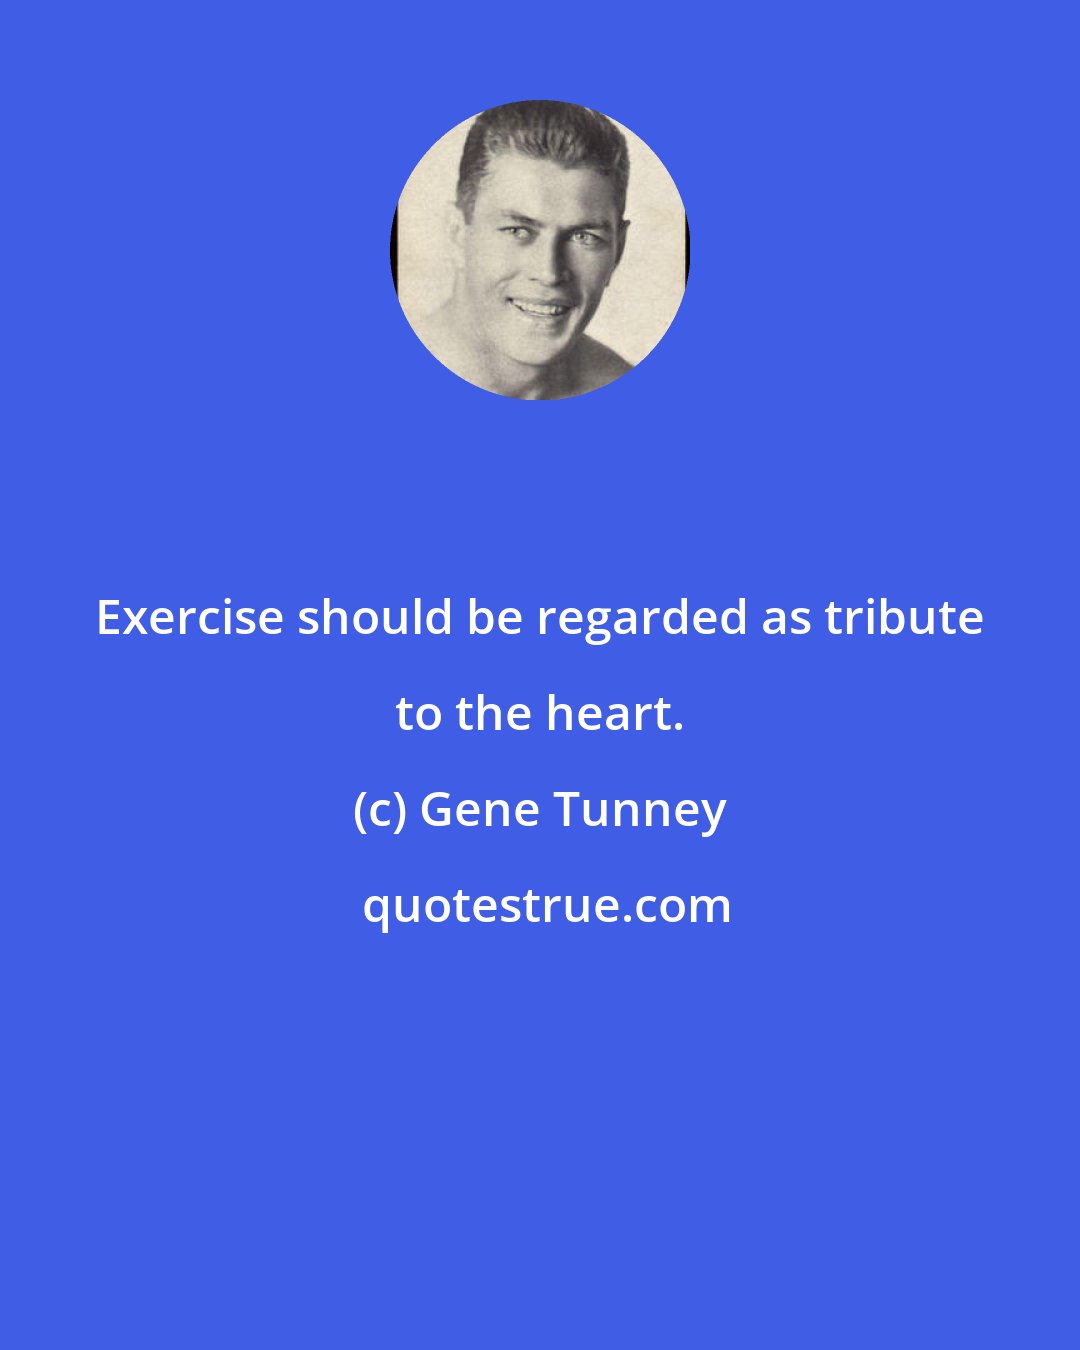 Gene Tunney: Exercise should be regarded as tribute to the heart.